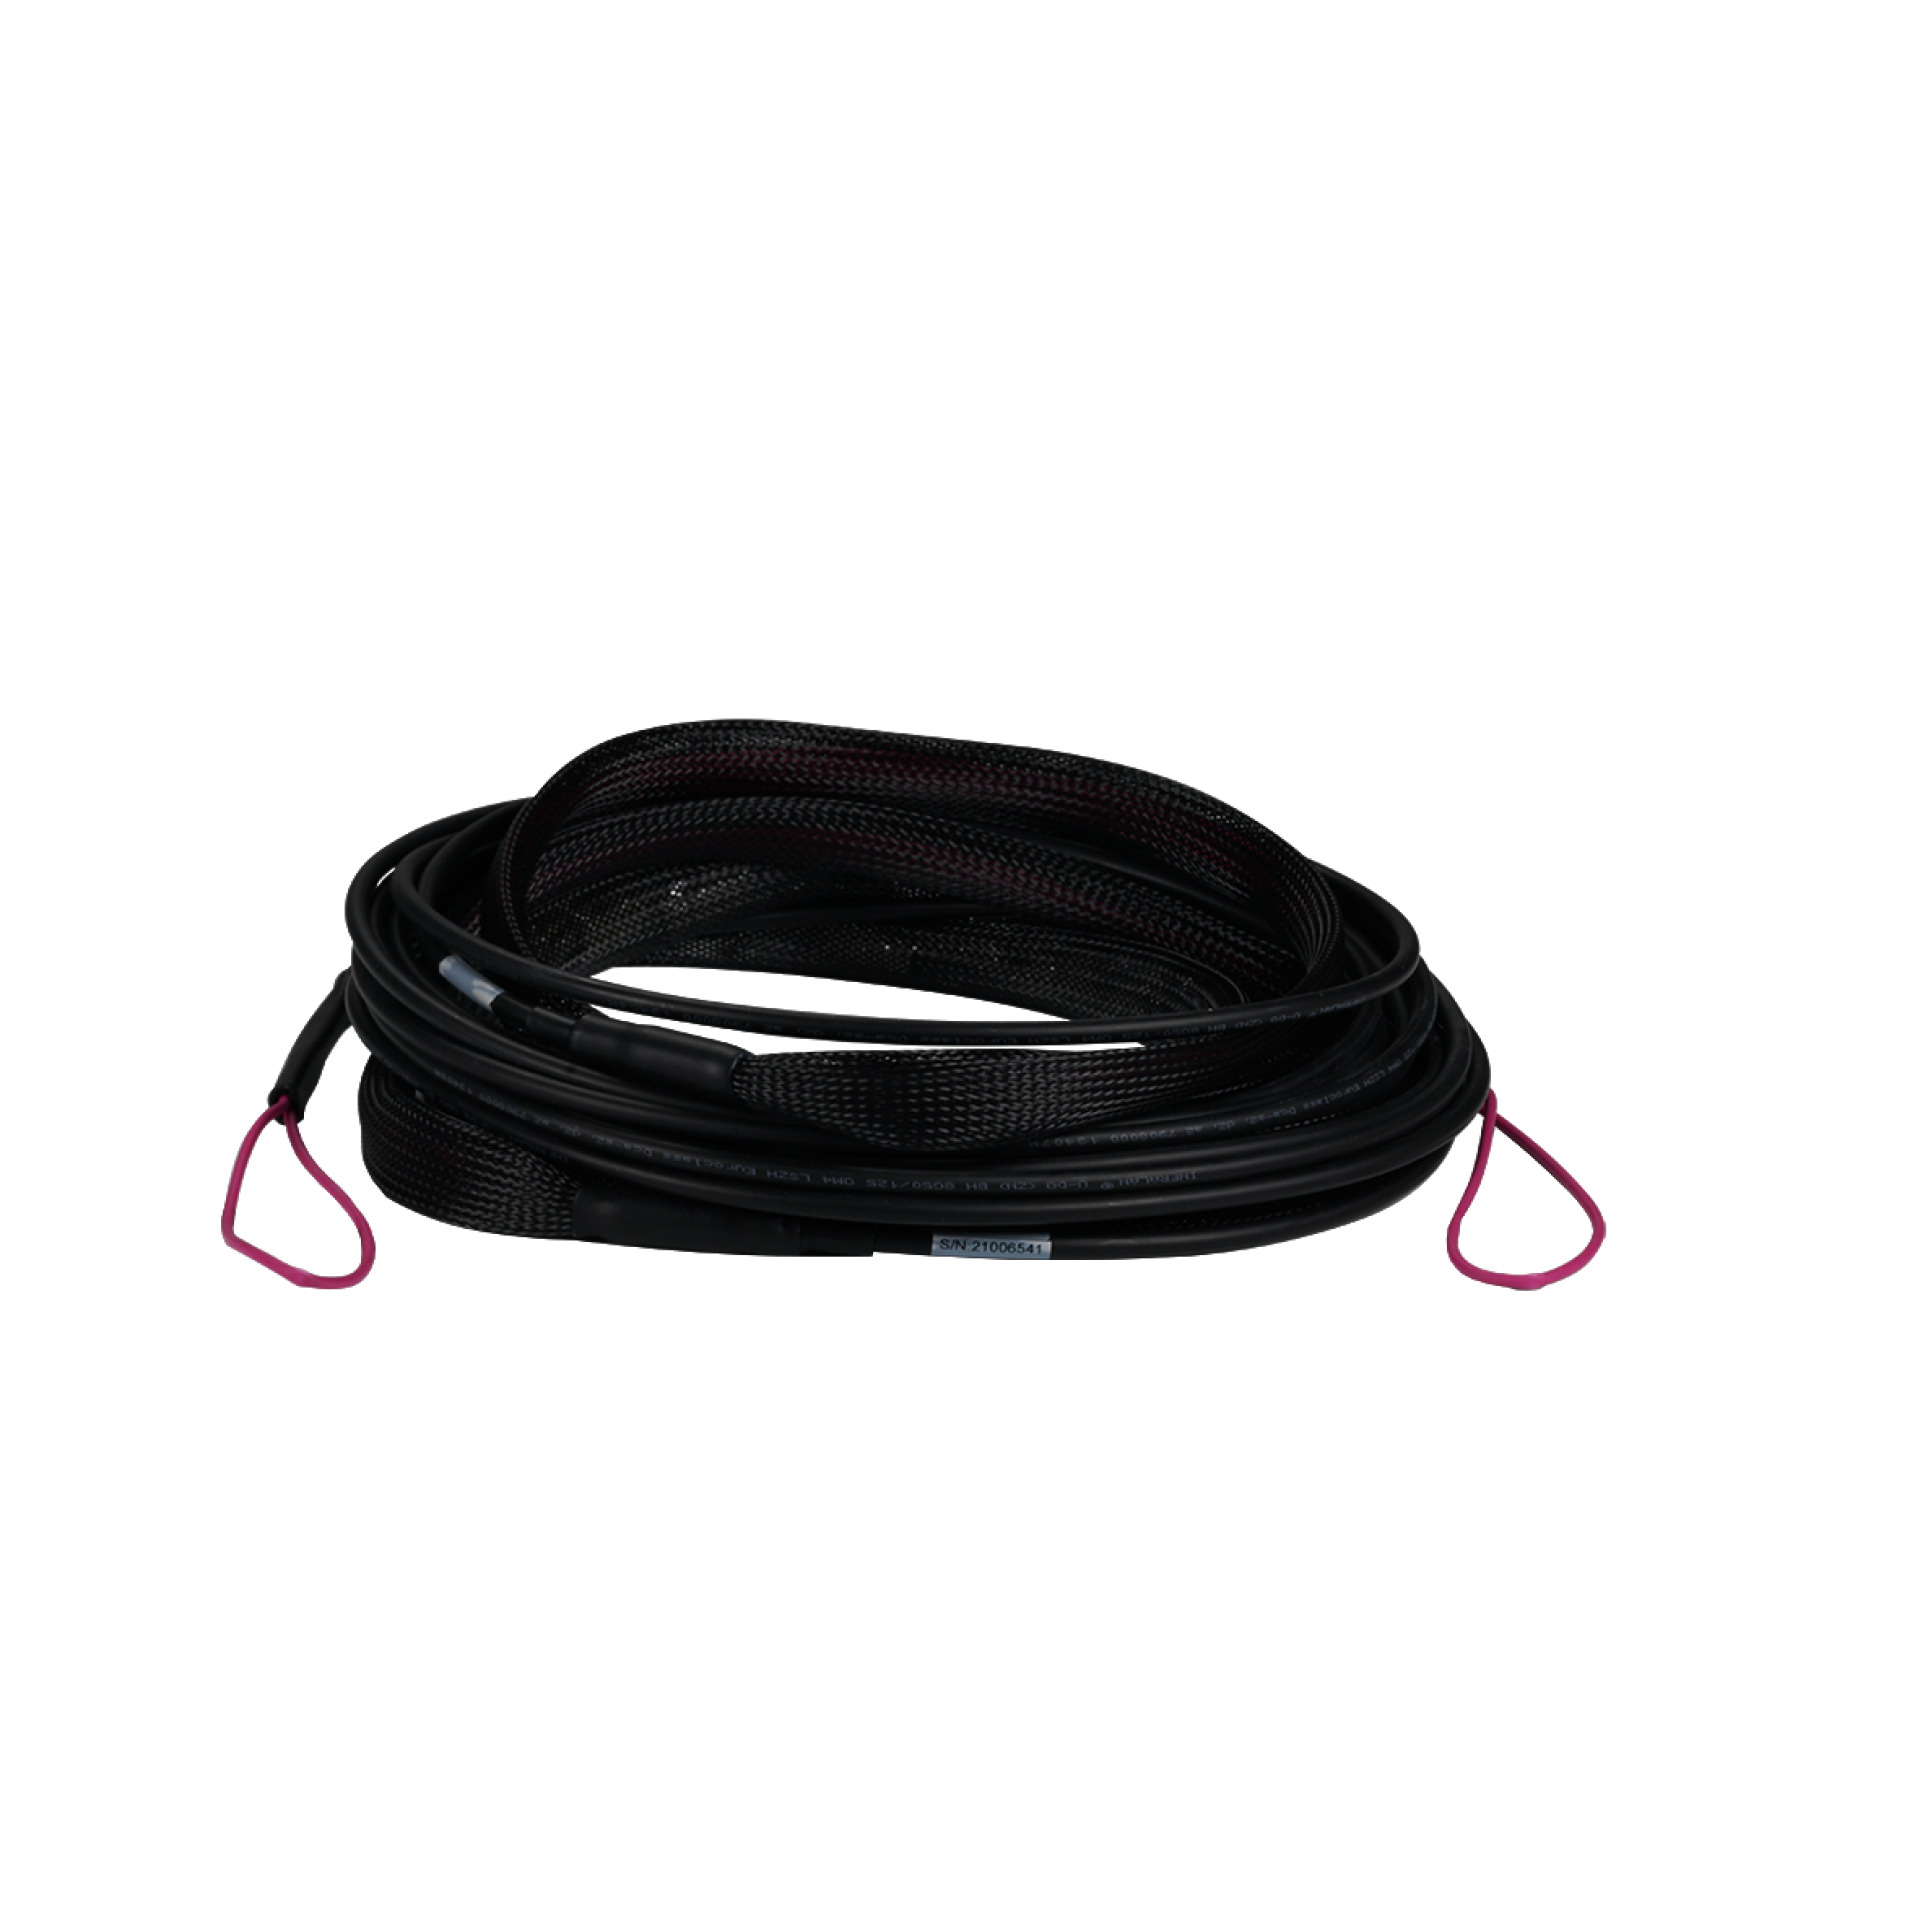 Trunk cable U-DQ(ZN)BH 12G 50/125, SC/SC OM4 200m